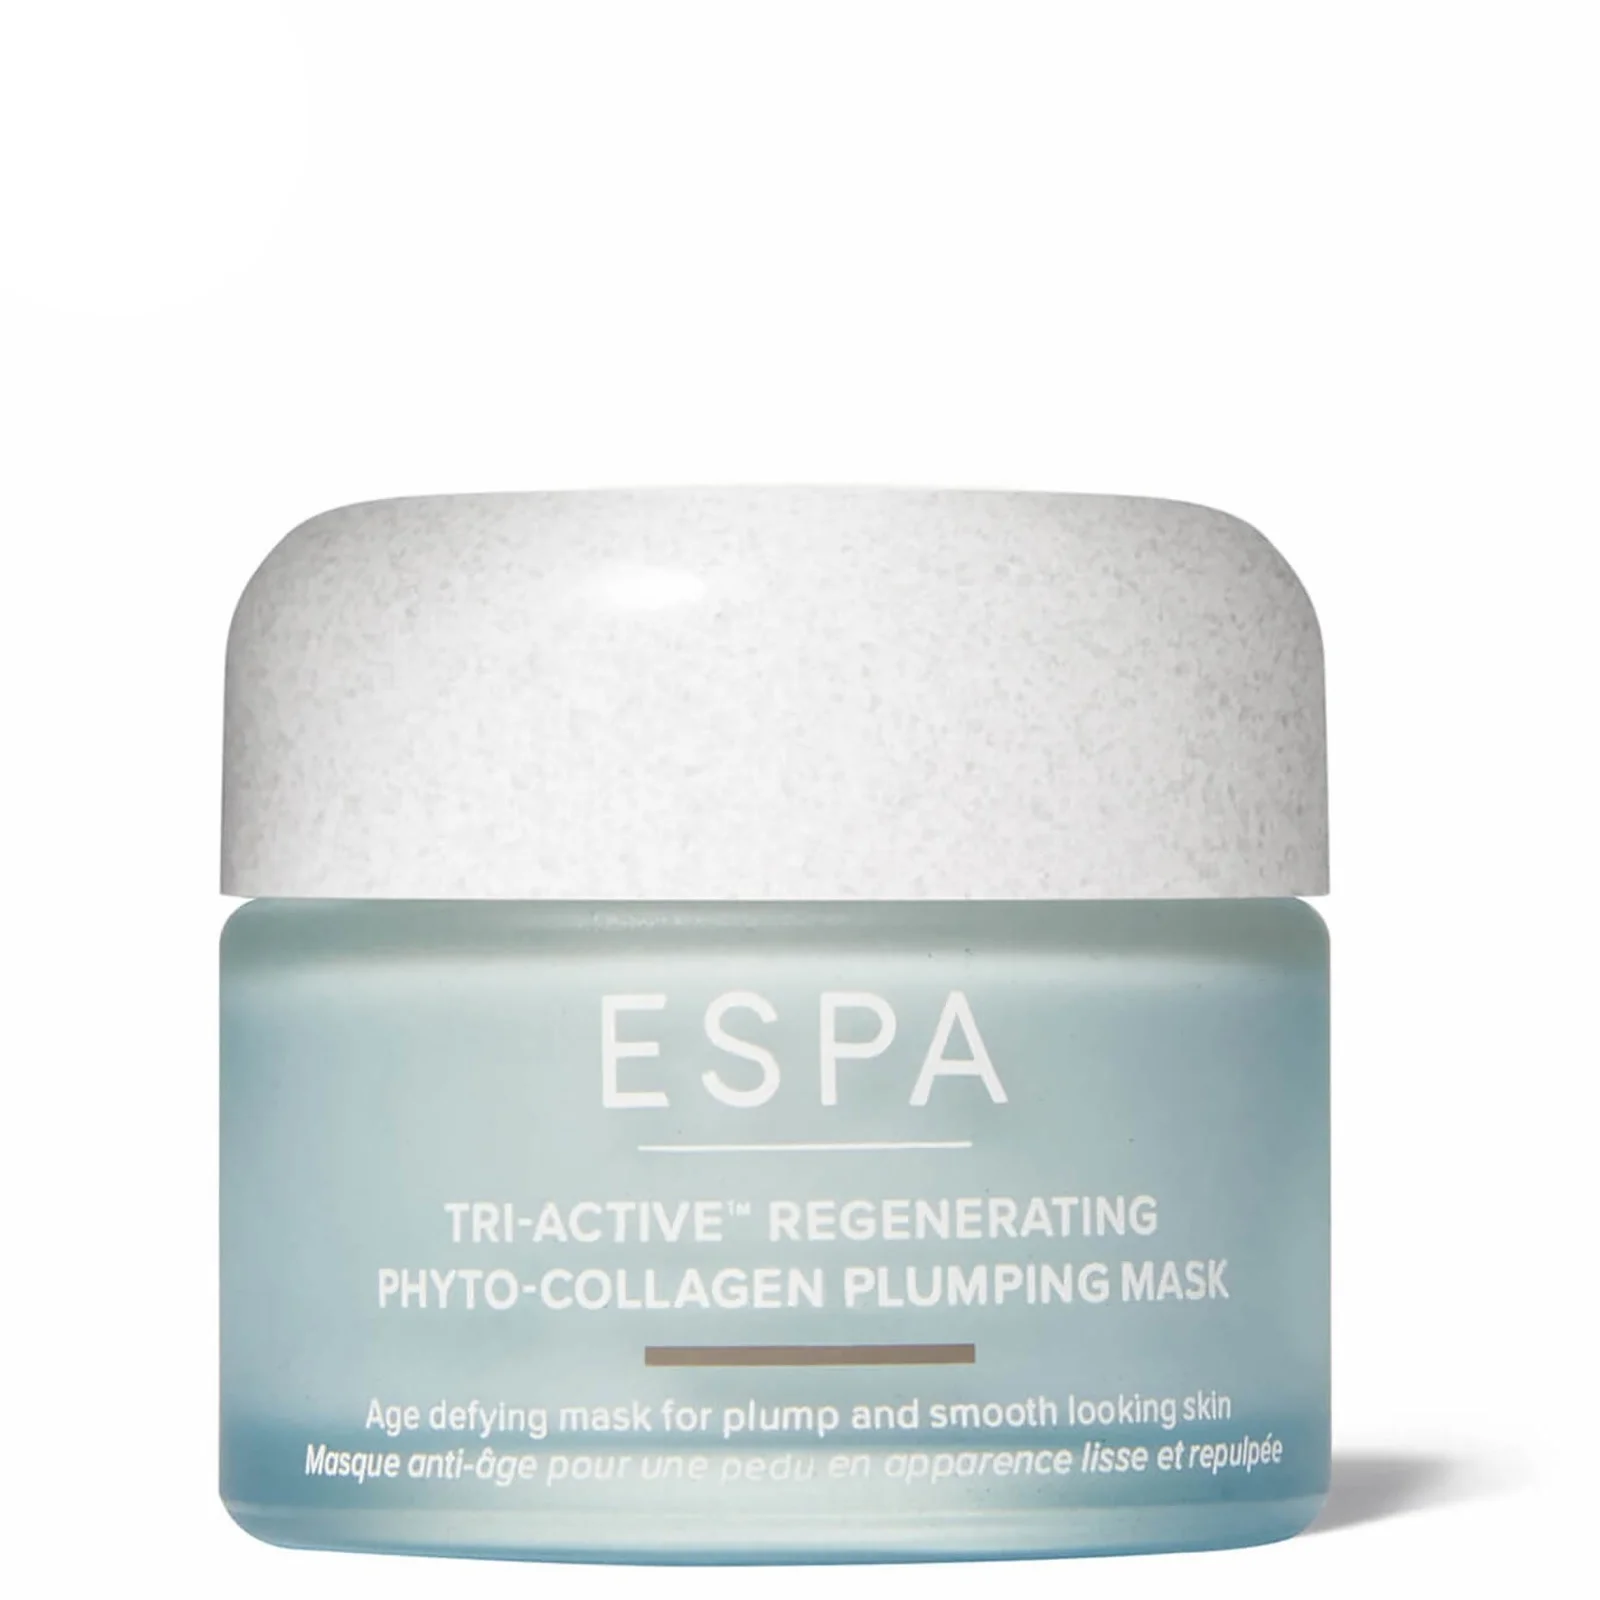 ESPA Phyto Collagen Plumping Mask 55ml Image 1